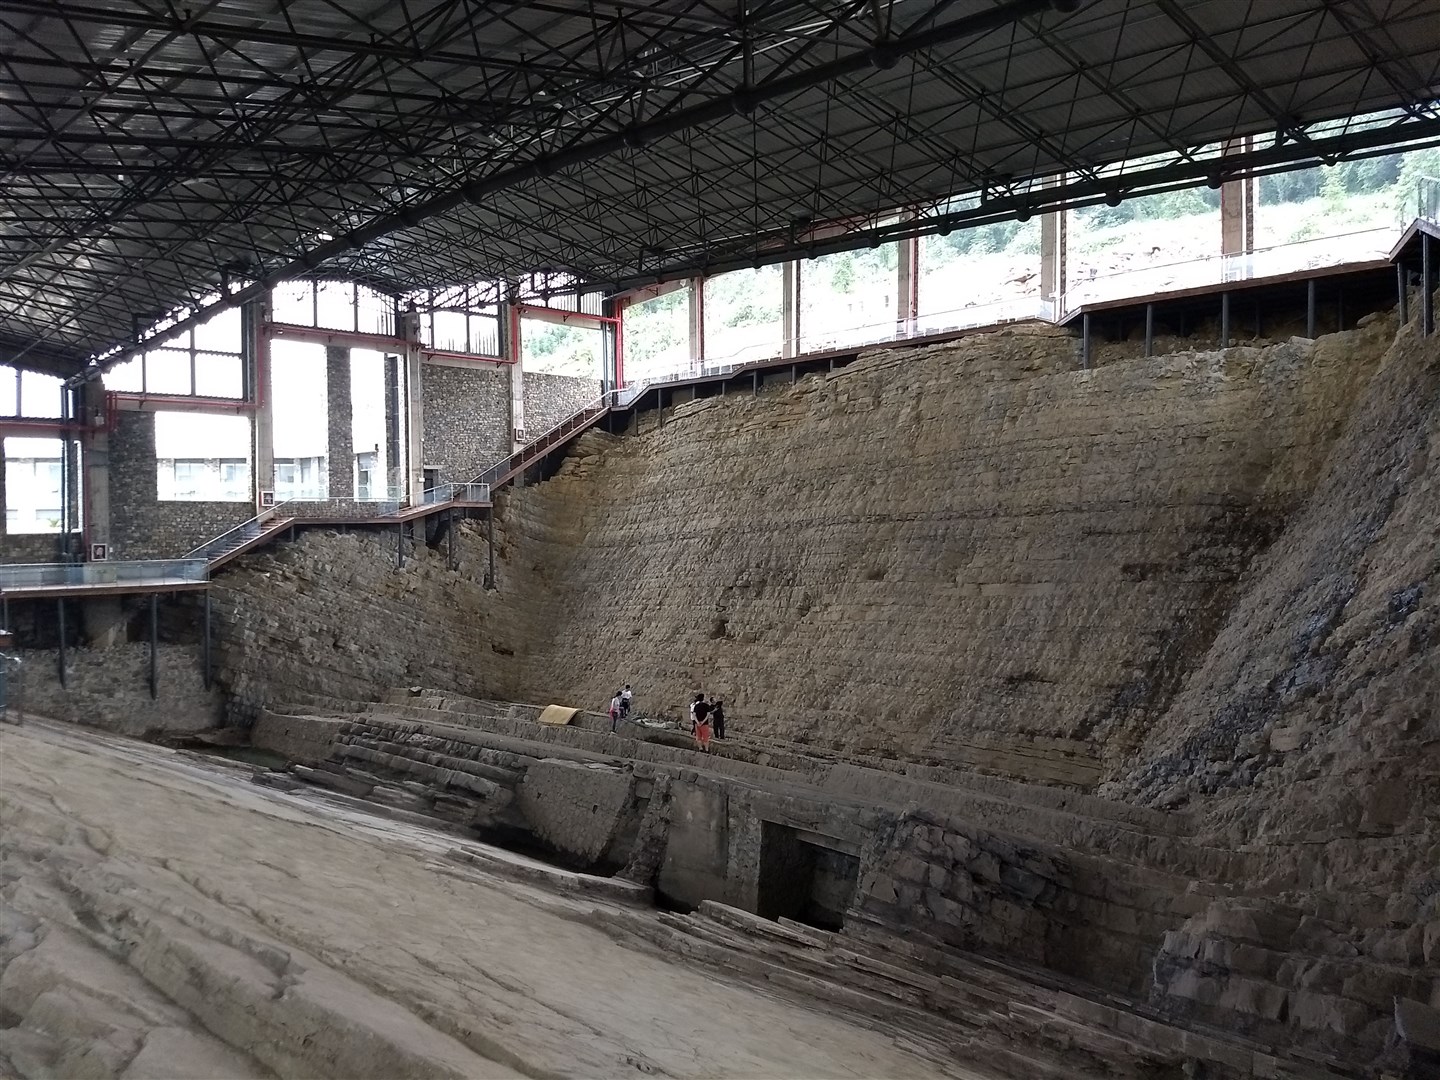 The quarry in the Guizhou province, China, where the ichthyosaur was uncovered, which is now part of a museum (Ryosuke Motani/University of California)